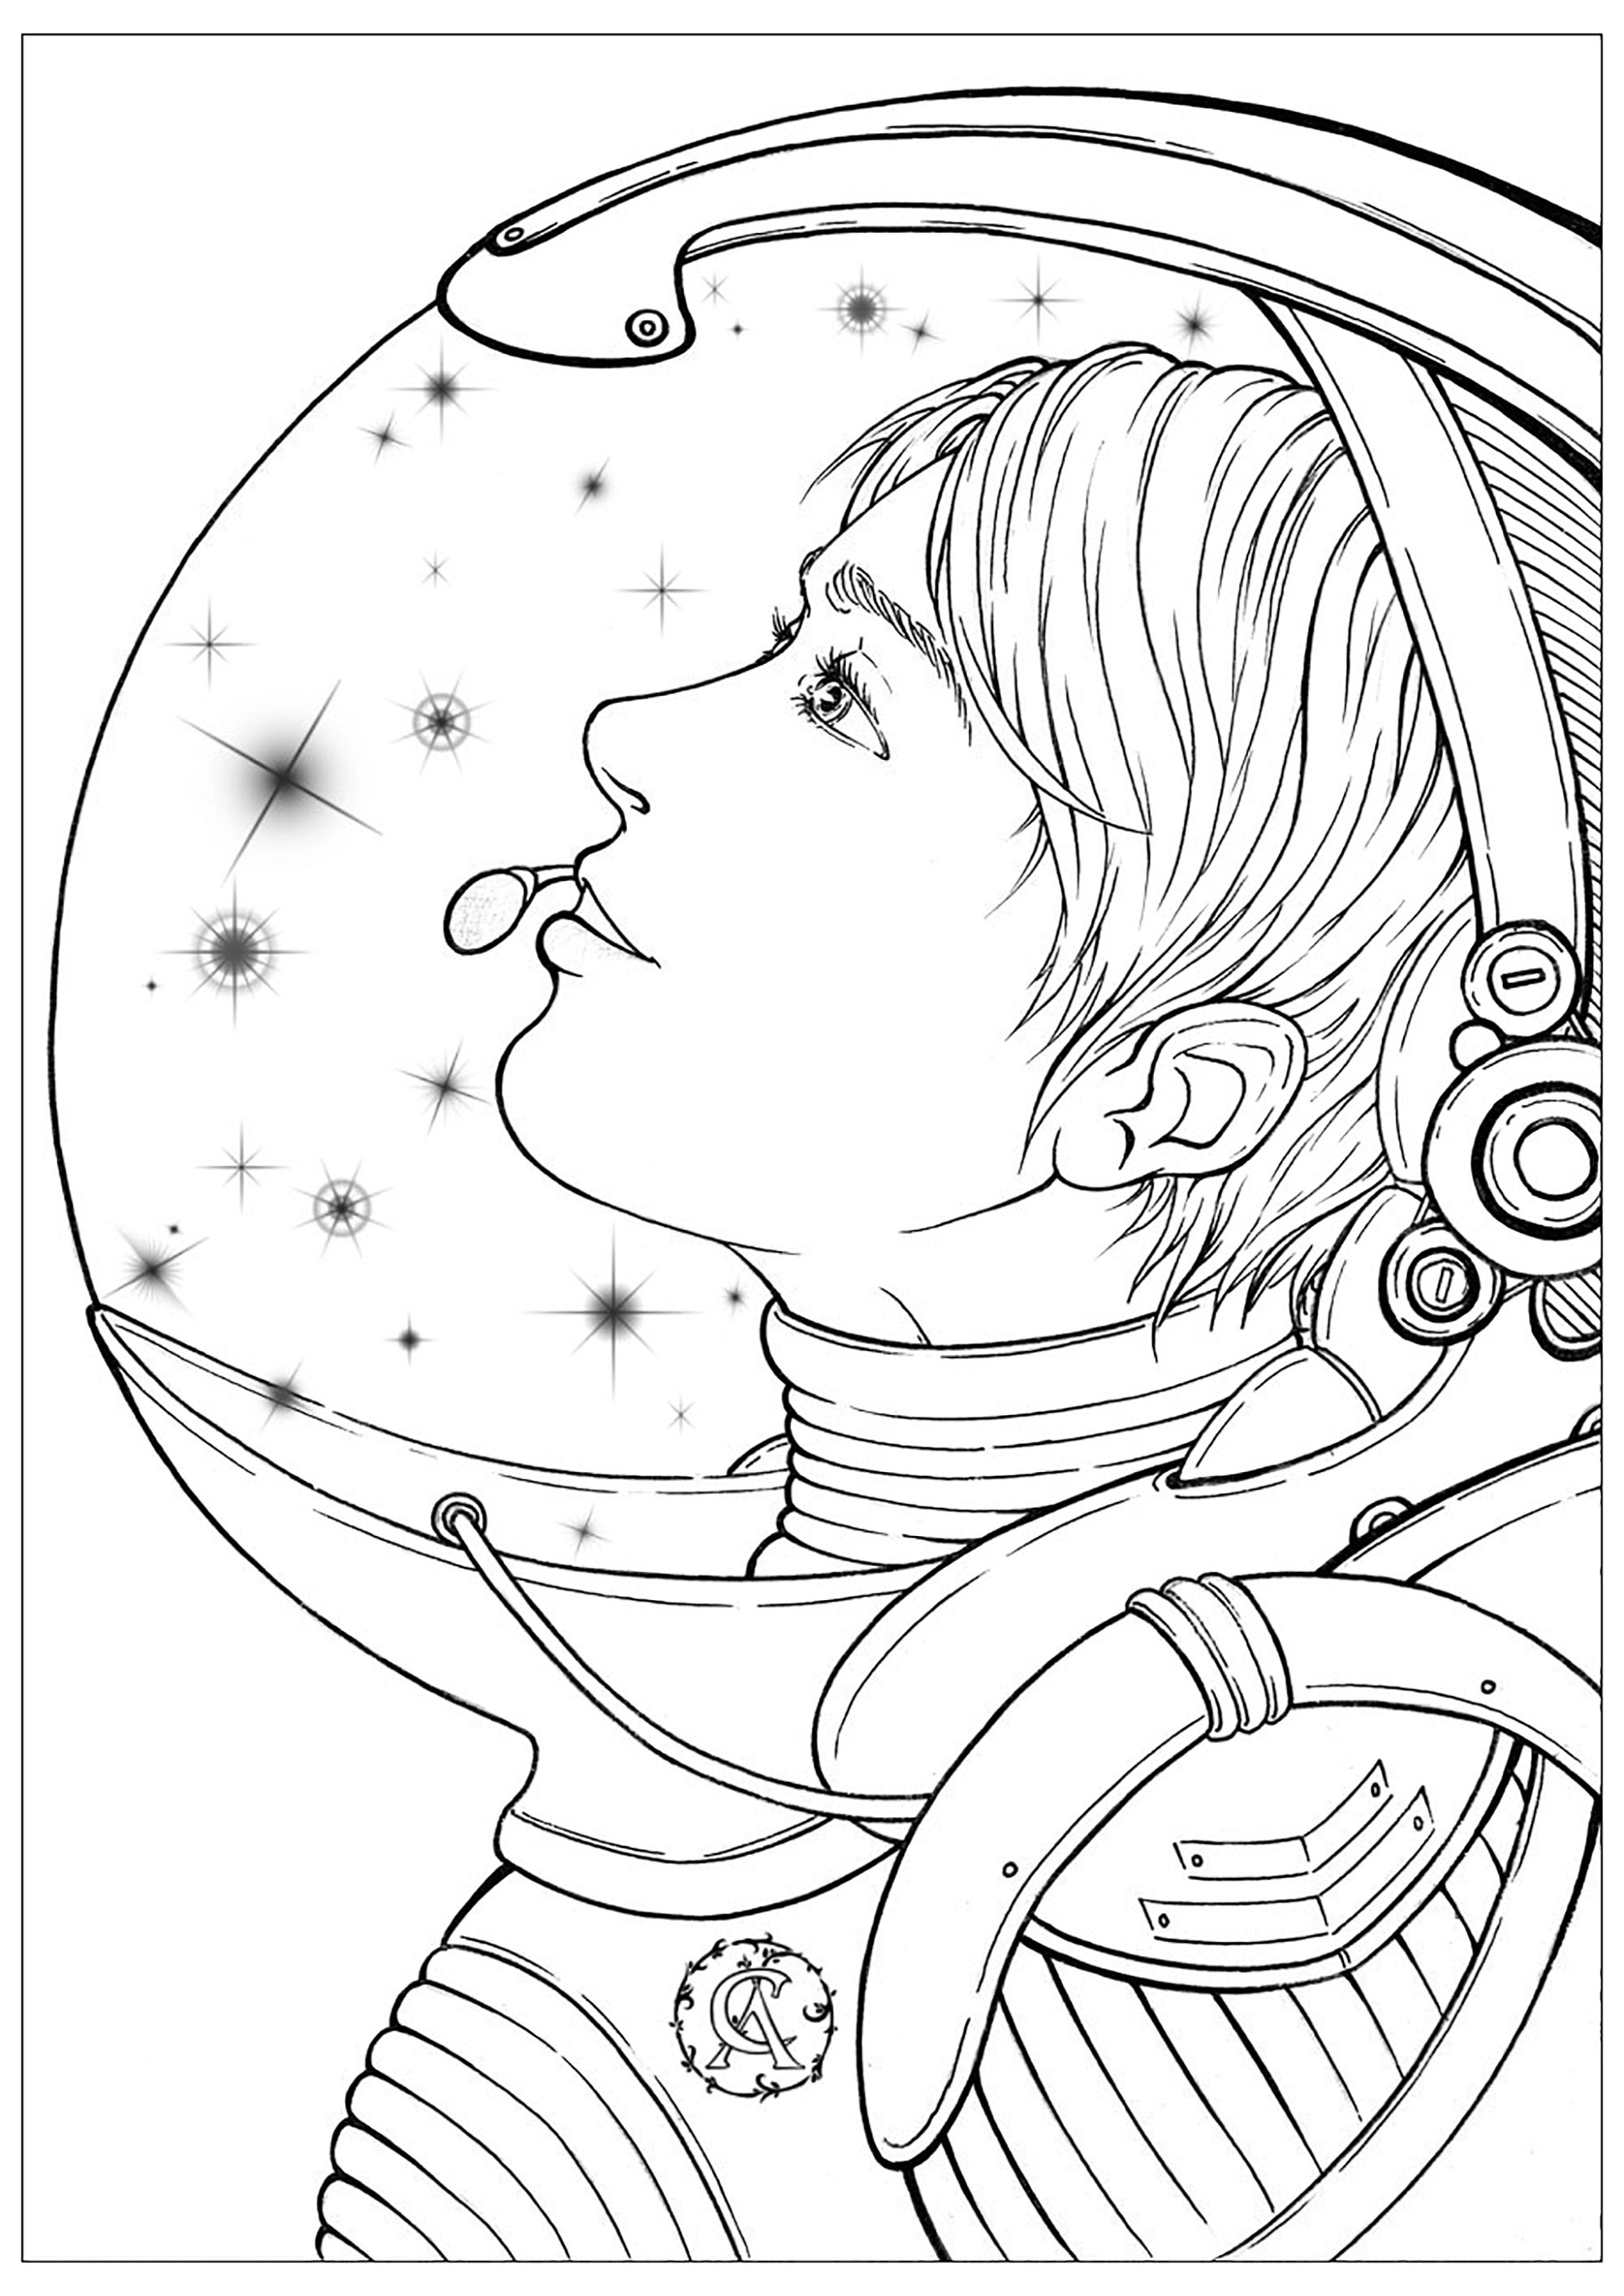 This astronaut in a suit dreams of the stars she will explore. This coloring page is an invitation to dream and escape to the stars. We see an astronaut, in profile, dressed in a space suit, contemplating the starry sky. Strange thing: the stars are in her helmet!
